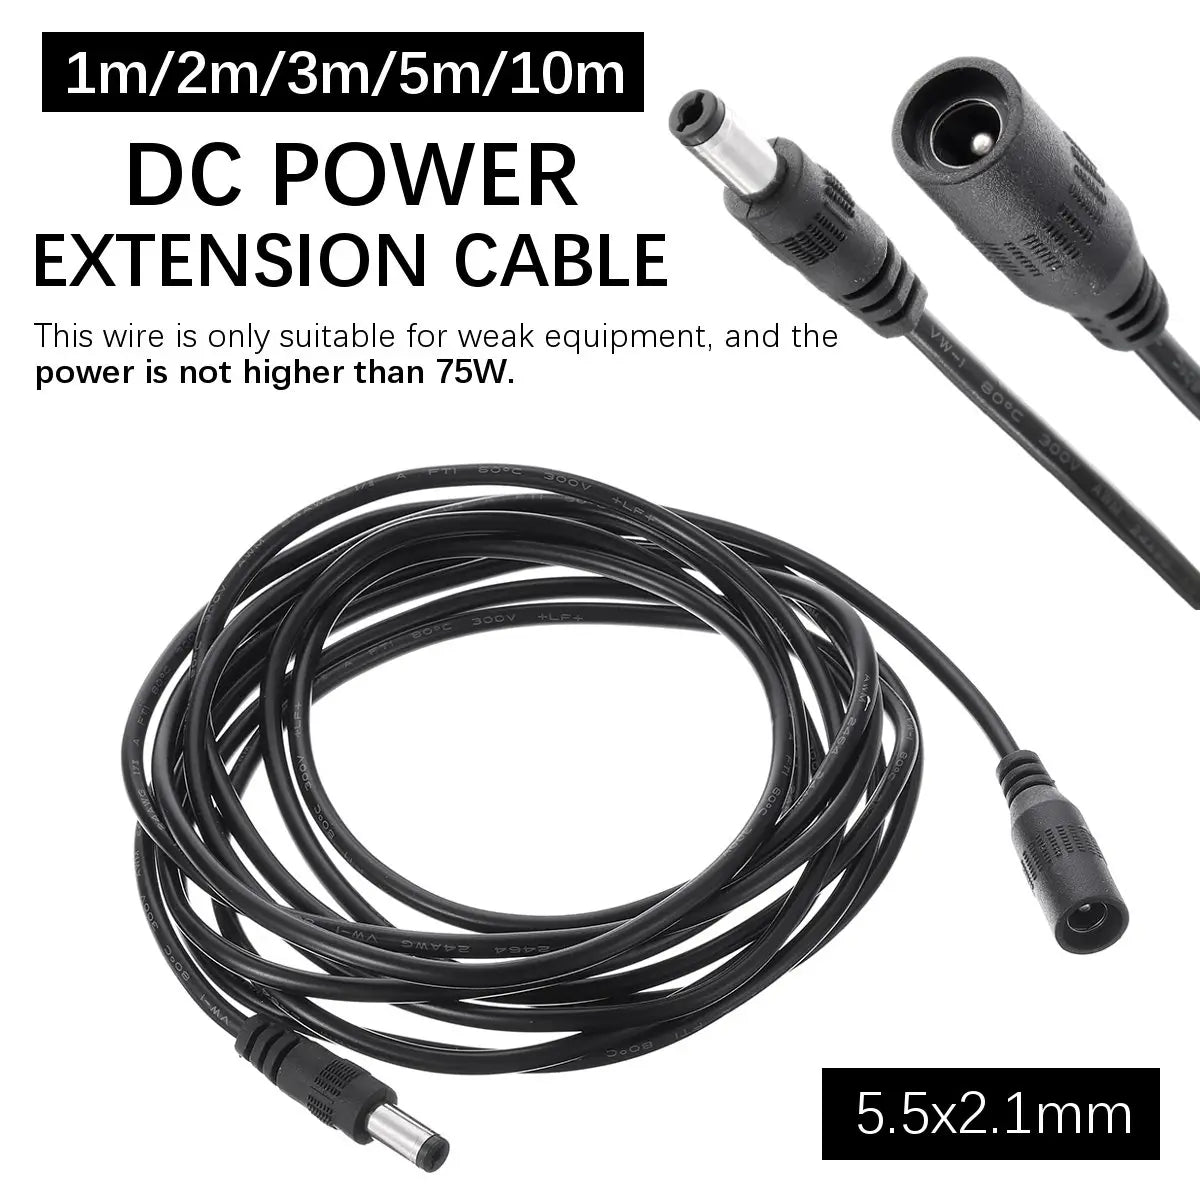 5.5x2.1mm Dc Power Extension Cable Cord Wire For Lower 75w